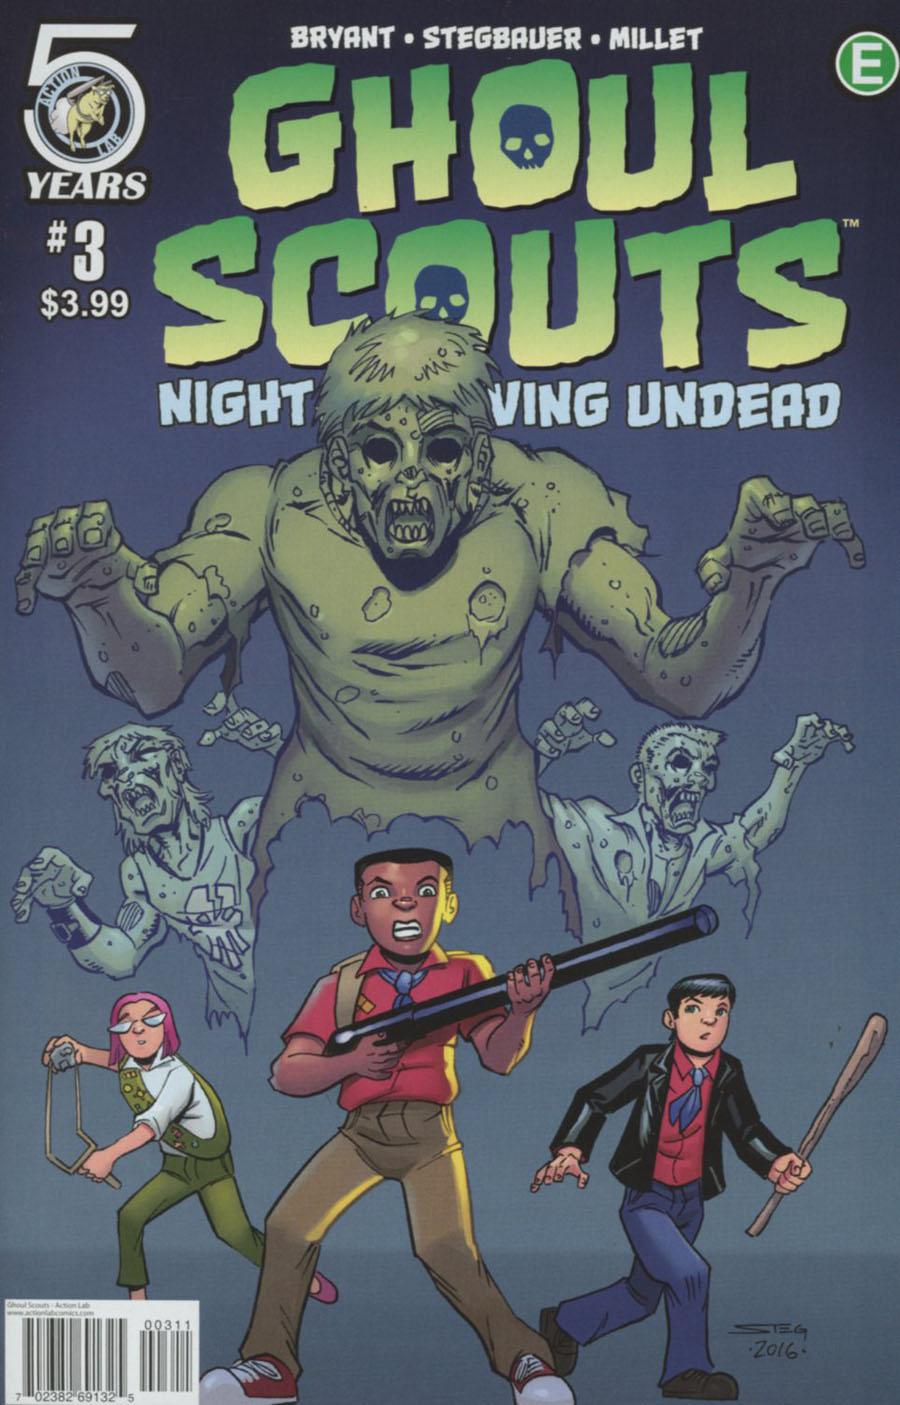 Ghoul Scouts Night Of The Unliving Undead Vol. 1 #3